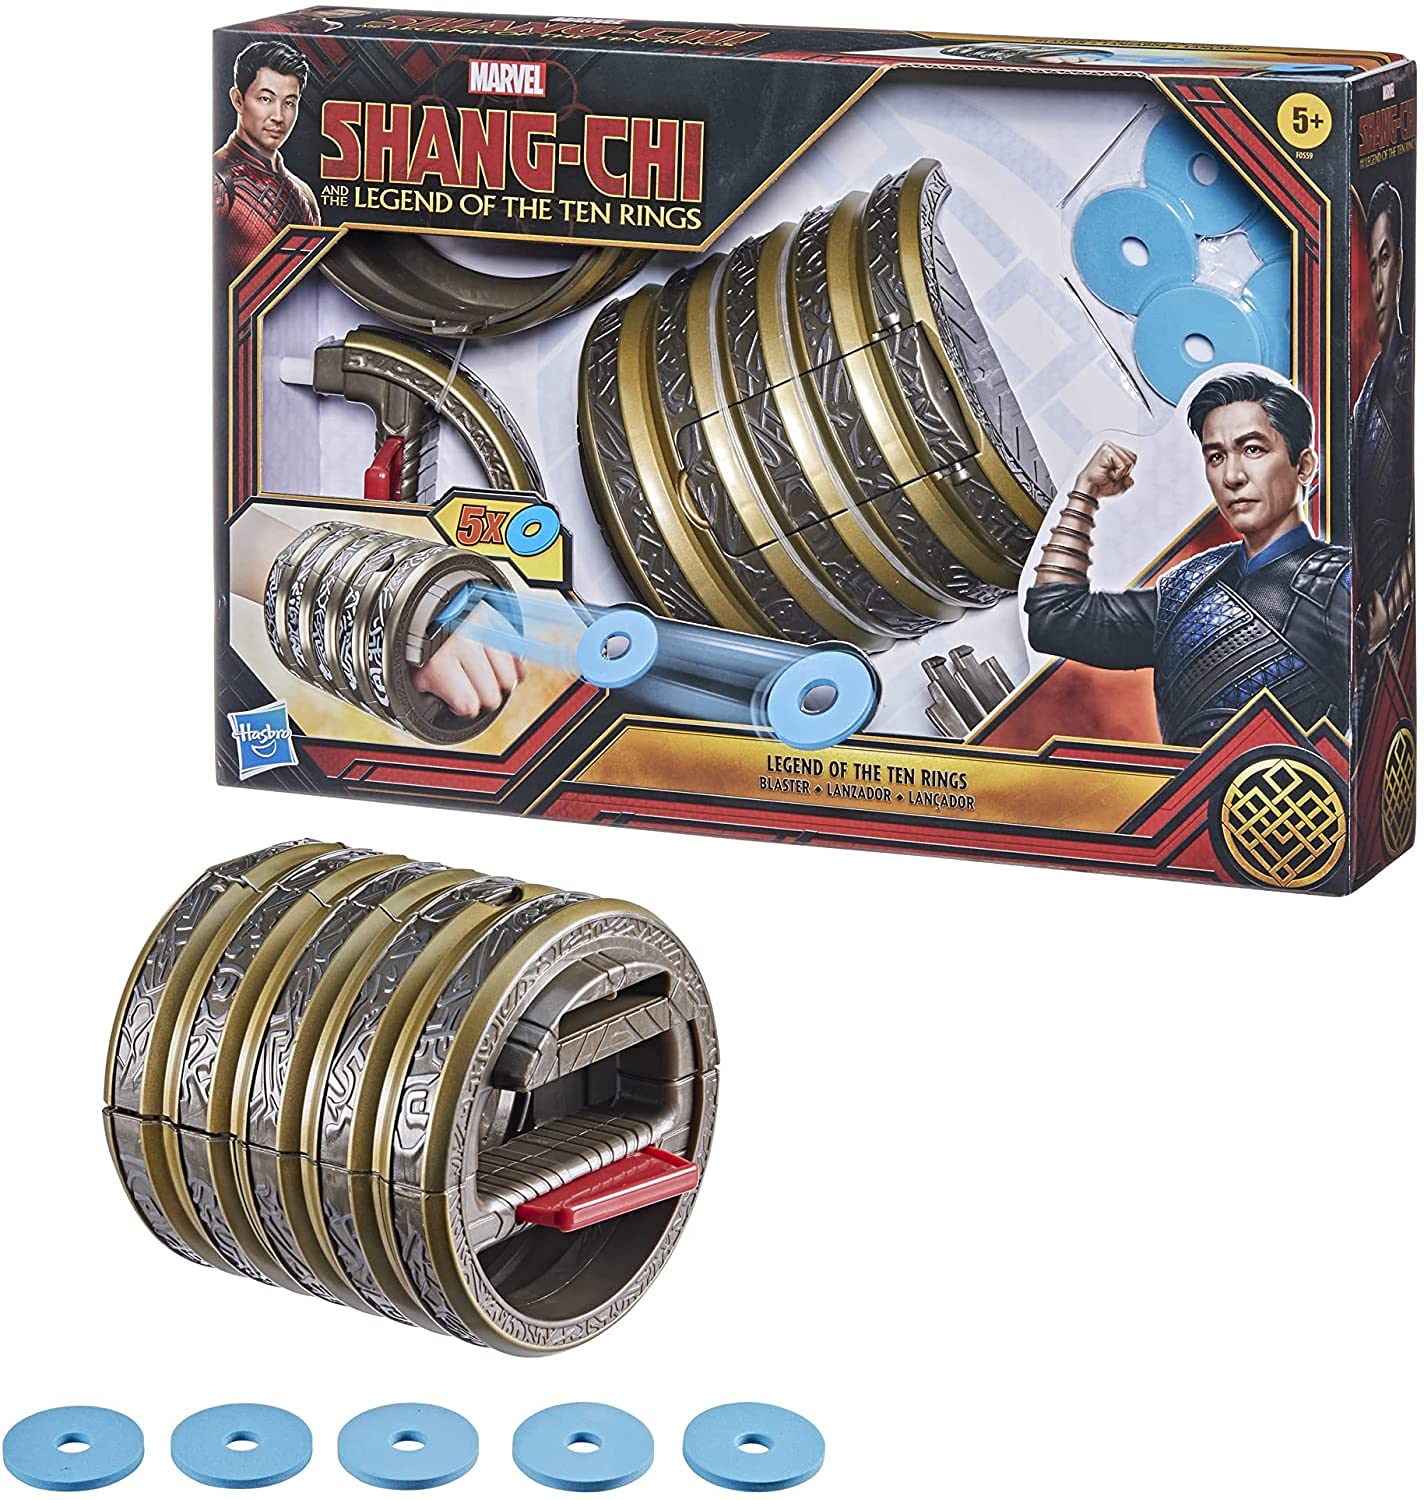 Marvel Hasbro Shang-Chi and The Legend of The Ten Rings Blaster Hero Role Play Action Toy, Includes 5 Rings, for Kids Ages 5 and Up